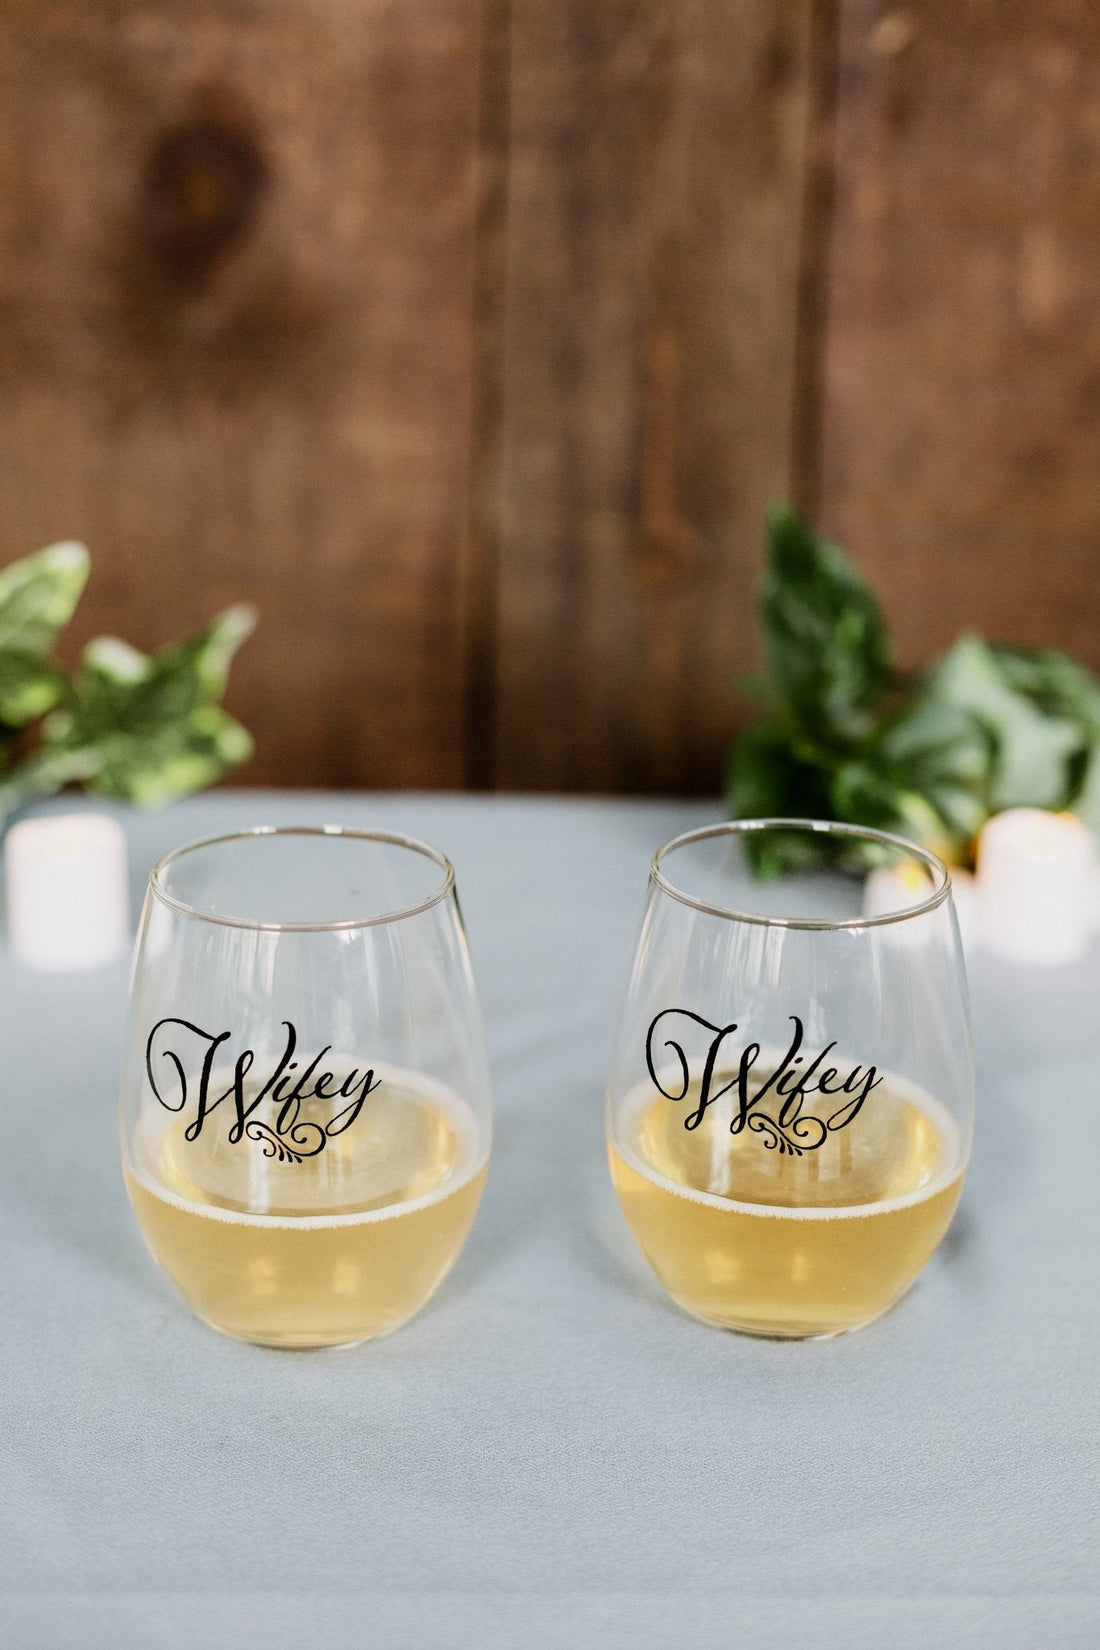 10 Reasons to Have an Open Bar at Your Wedding! - TheirBigDay